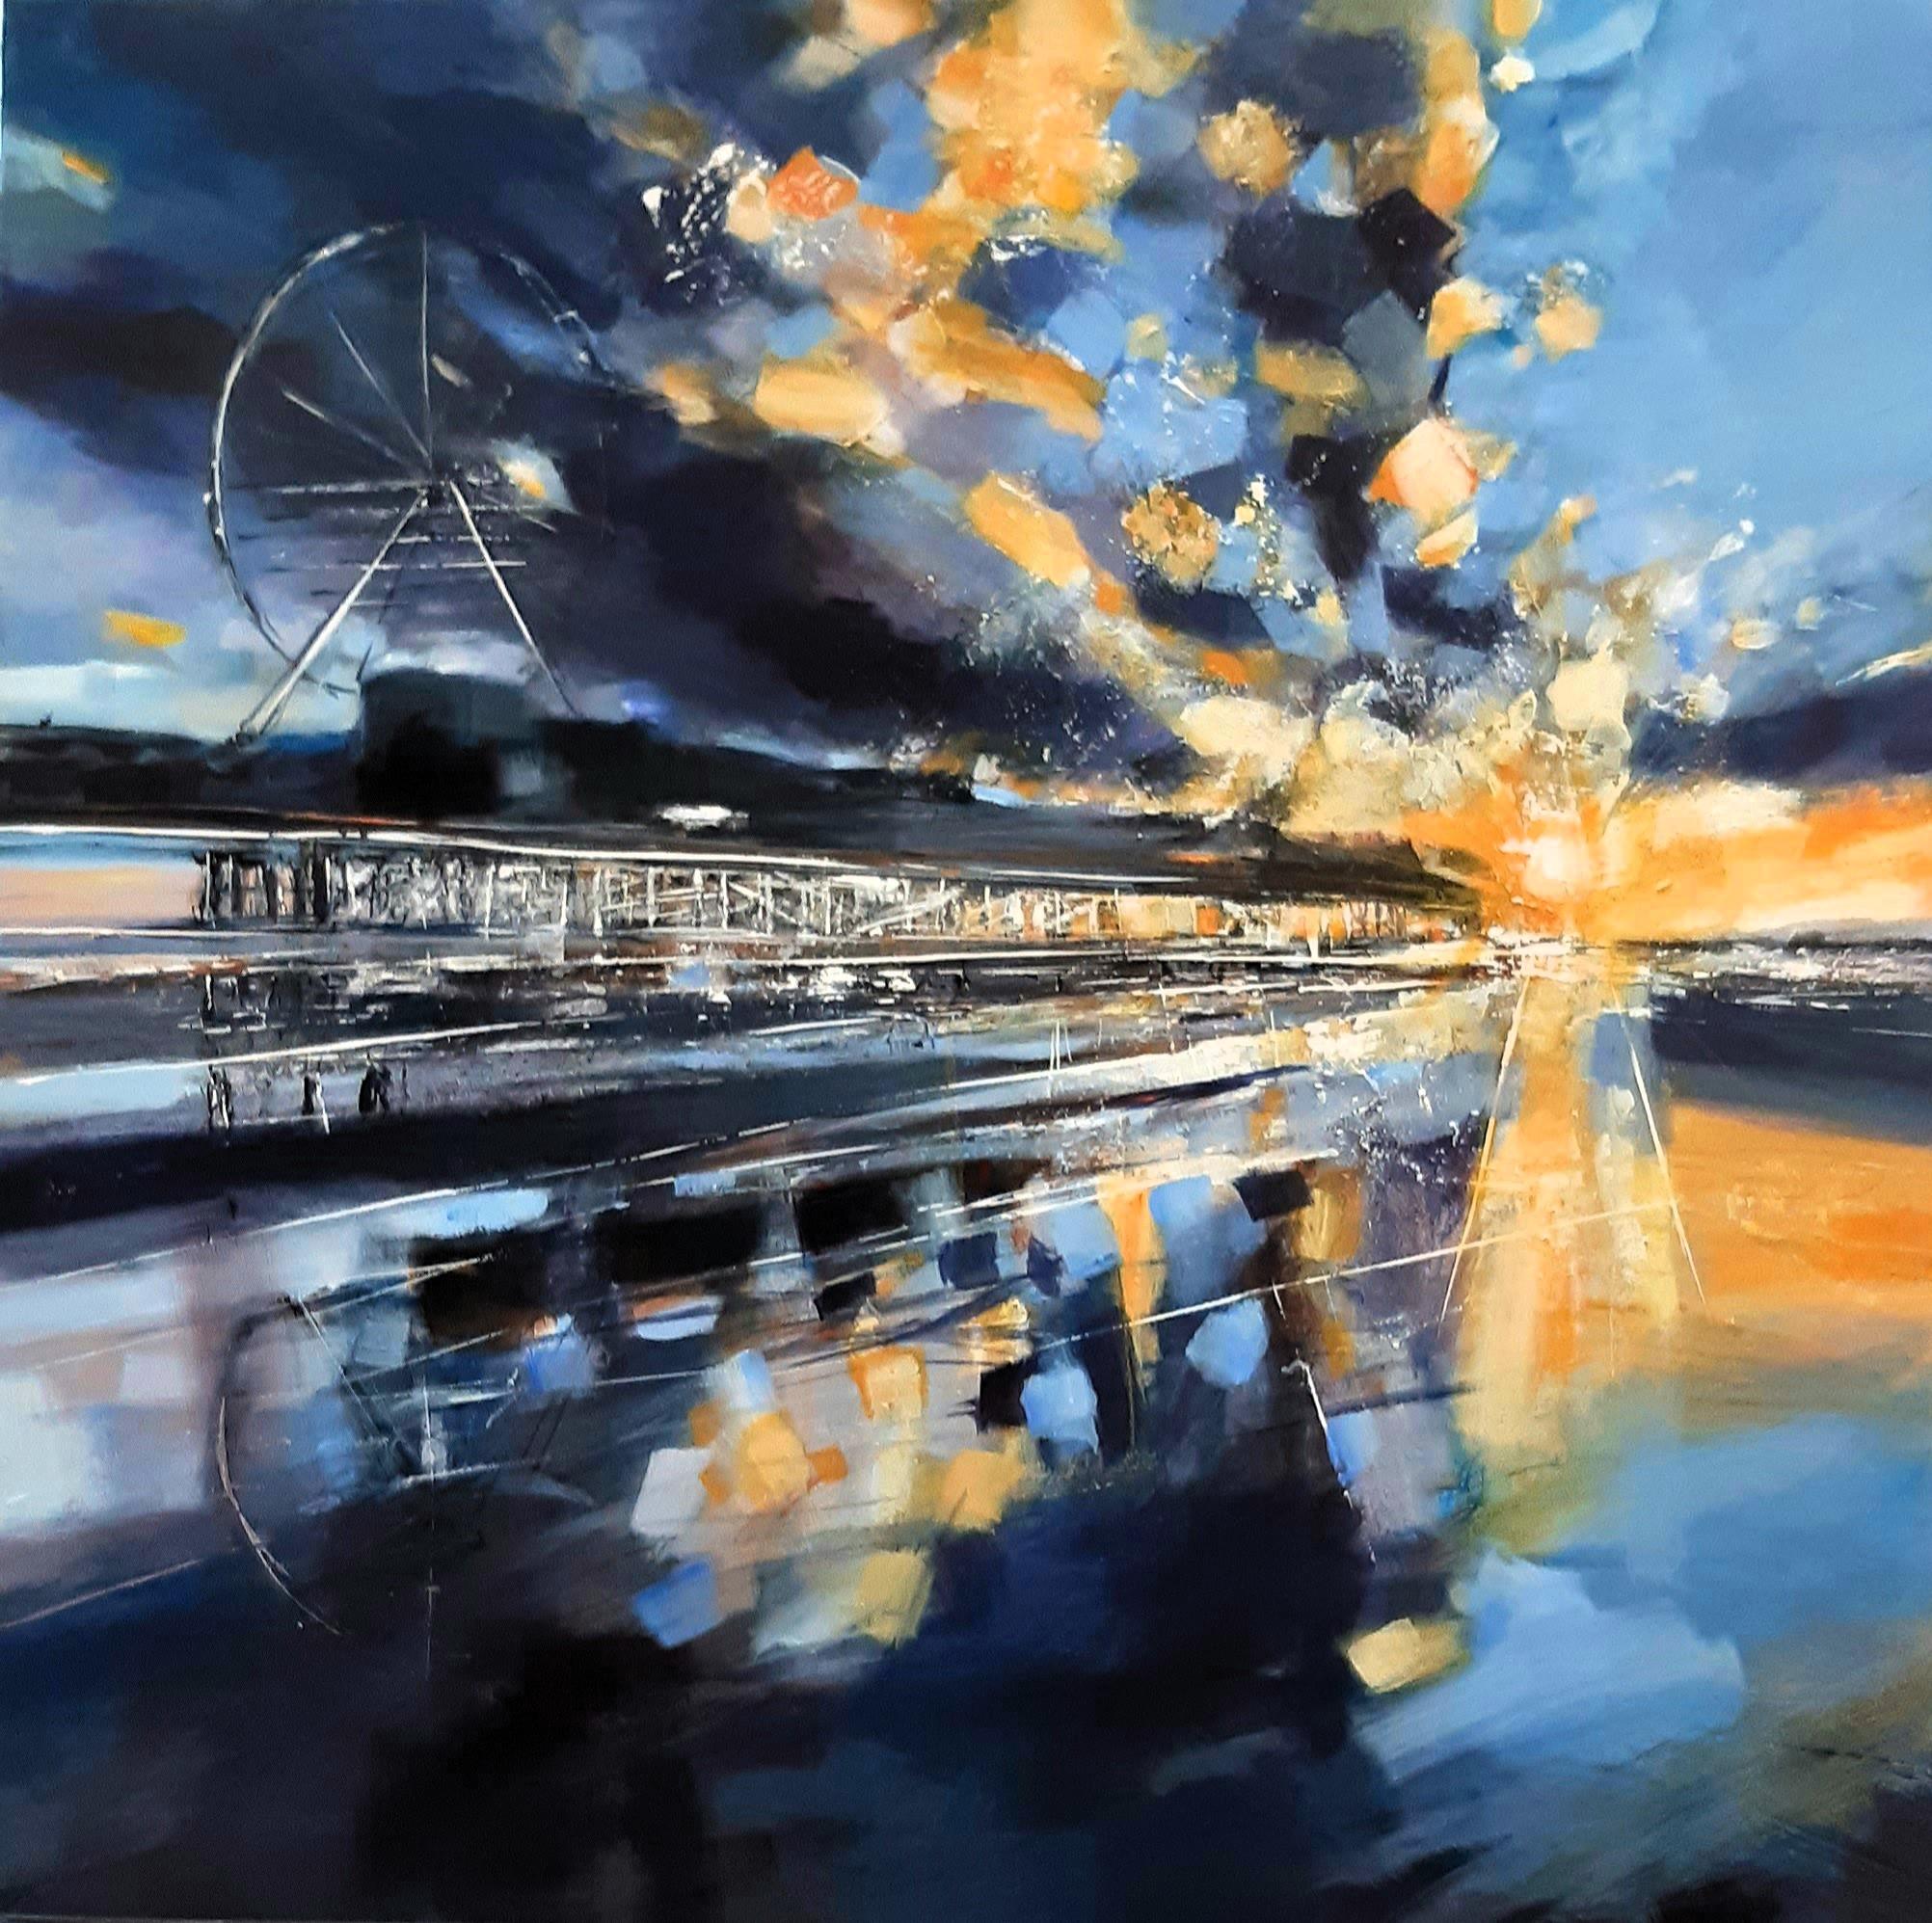 Central Pier Blackpool by Lita Narayan A large original painting of the central pier on Blackpool's golden mile, 91.4cm square, acrylic on deep stretched canvas. Sold unframed but ready to hang. A striking piece in blues and orange and light, to